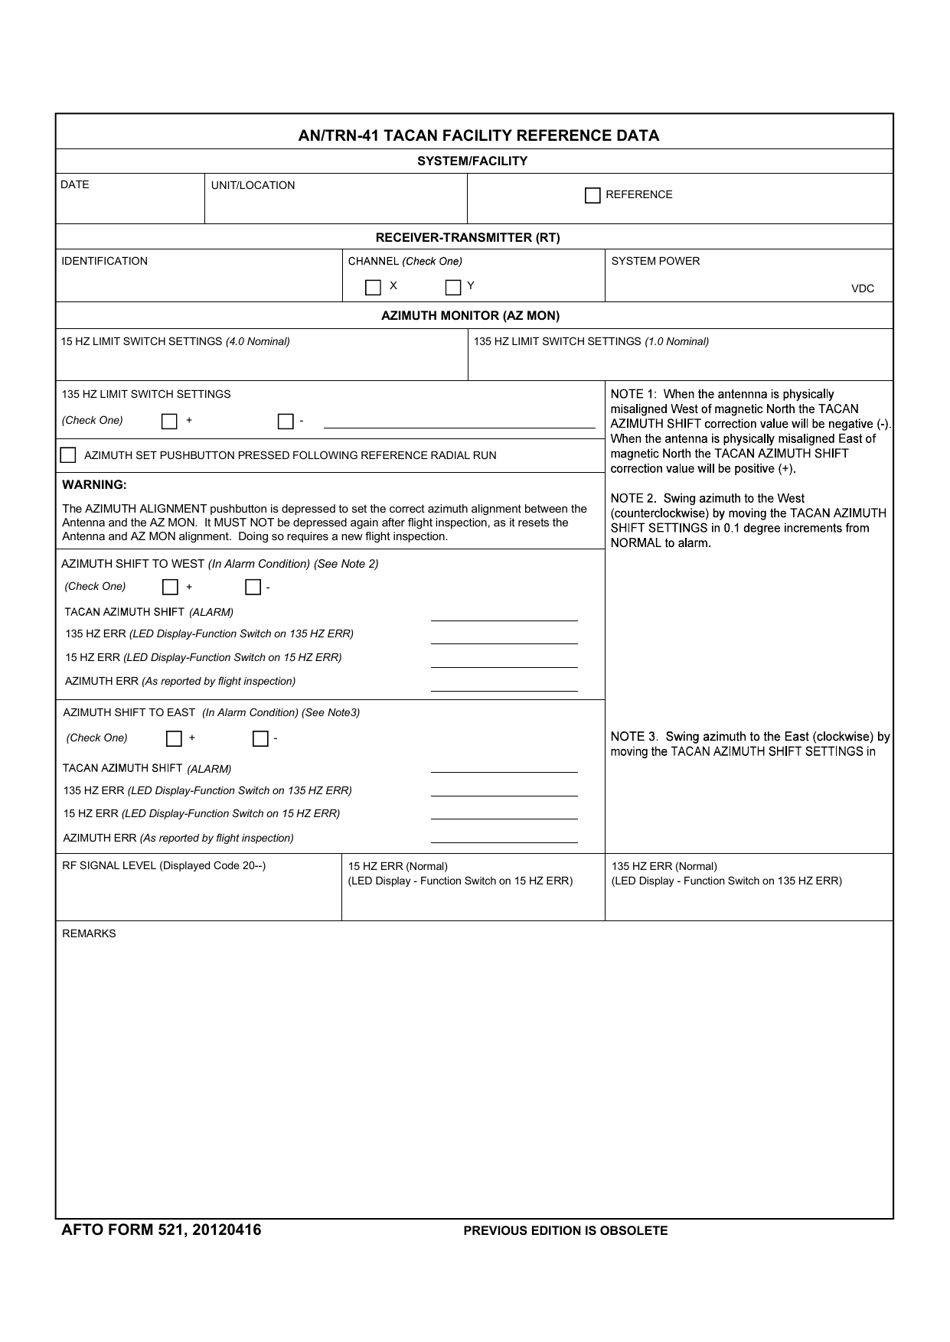 AFTO Form 521 An / Trn-41 Tacan Reference Data, Page 1